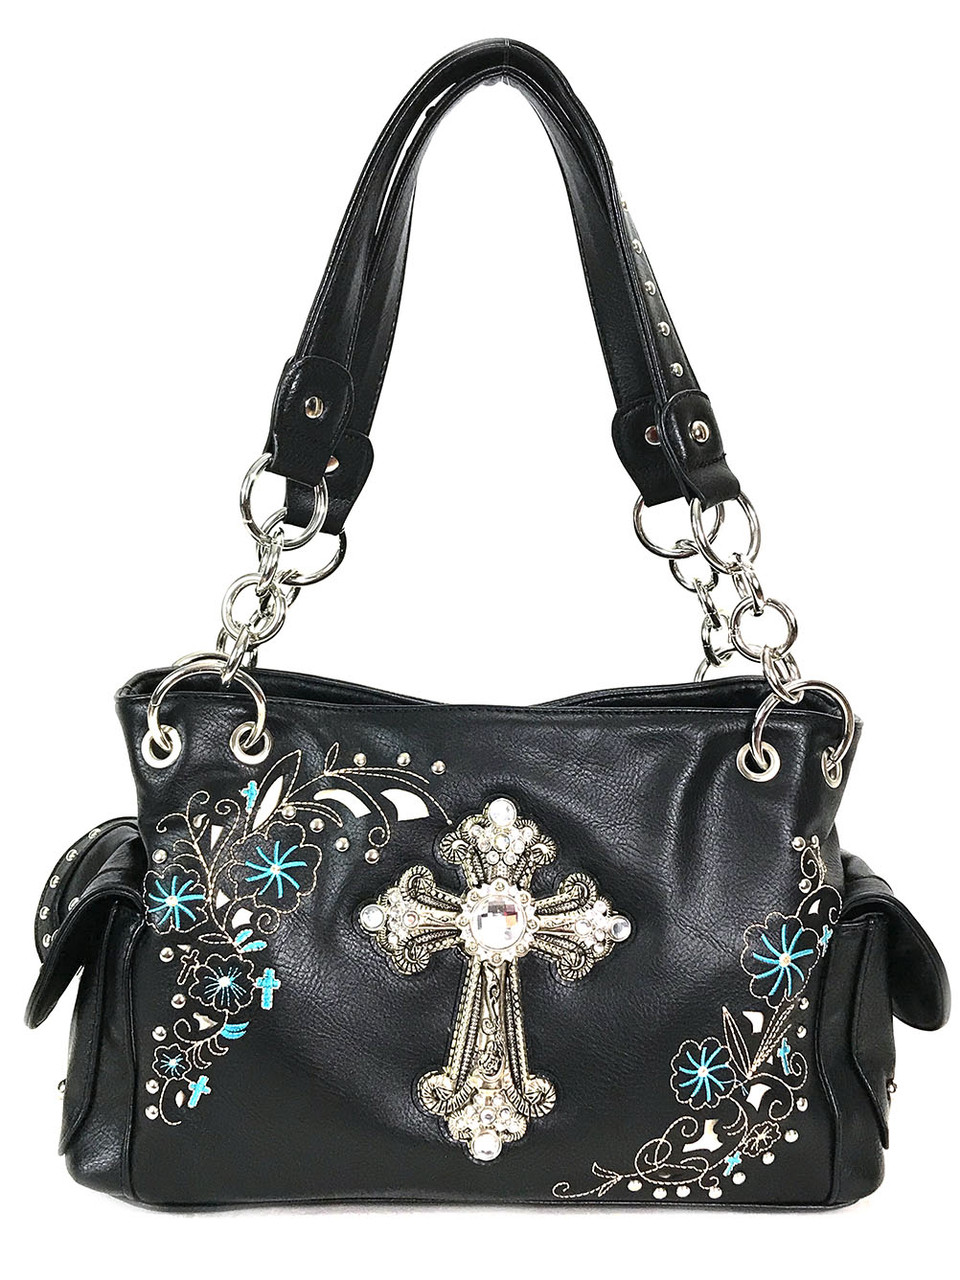 Western Style Rhinestone Cross Totes Women Concealed Carry Purse Bag Wallet  Set | eBay